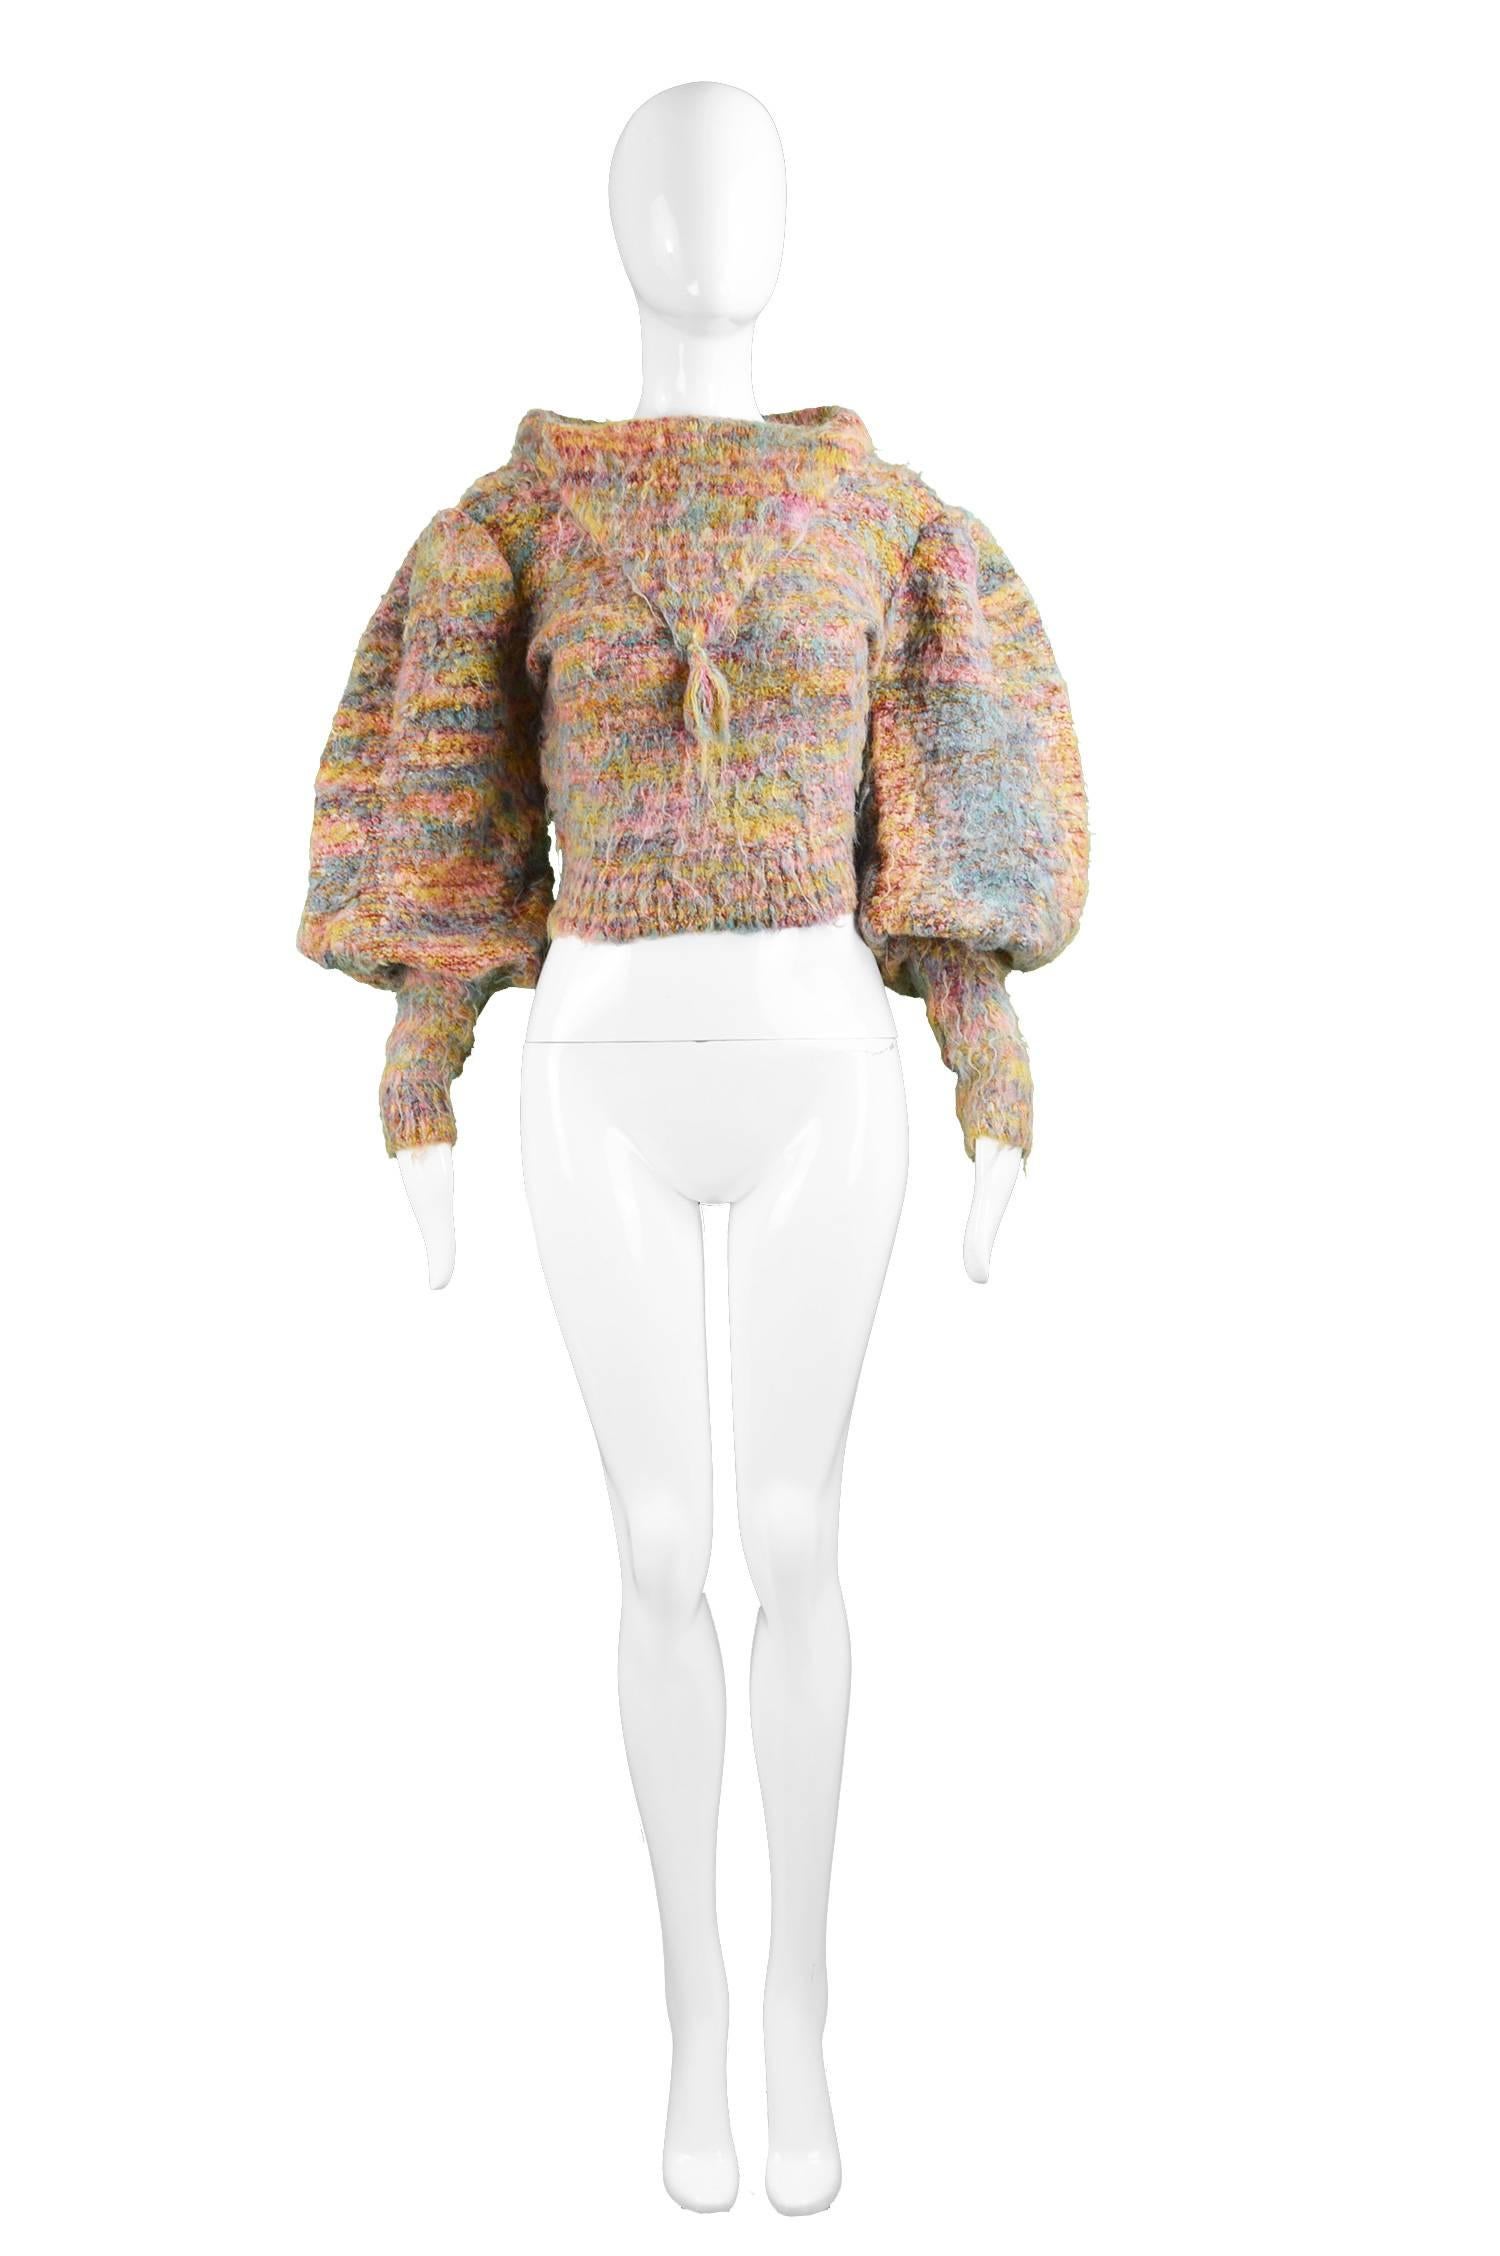 A dramatic and avant garde vintage women's sweater from the 1980s by highly collectable luxury knitwear designer, Gil Aimbez for Static. In a multicoloured fuzzy rainbow knit fabric with huge leg o mutton / balloon sleeves that flare out at the